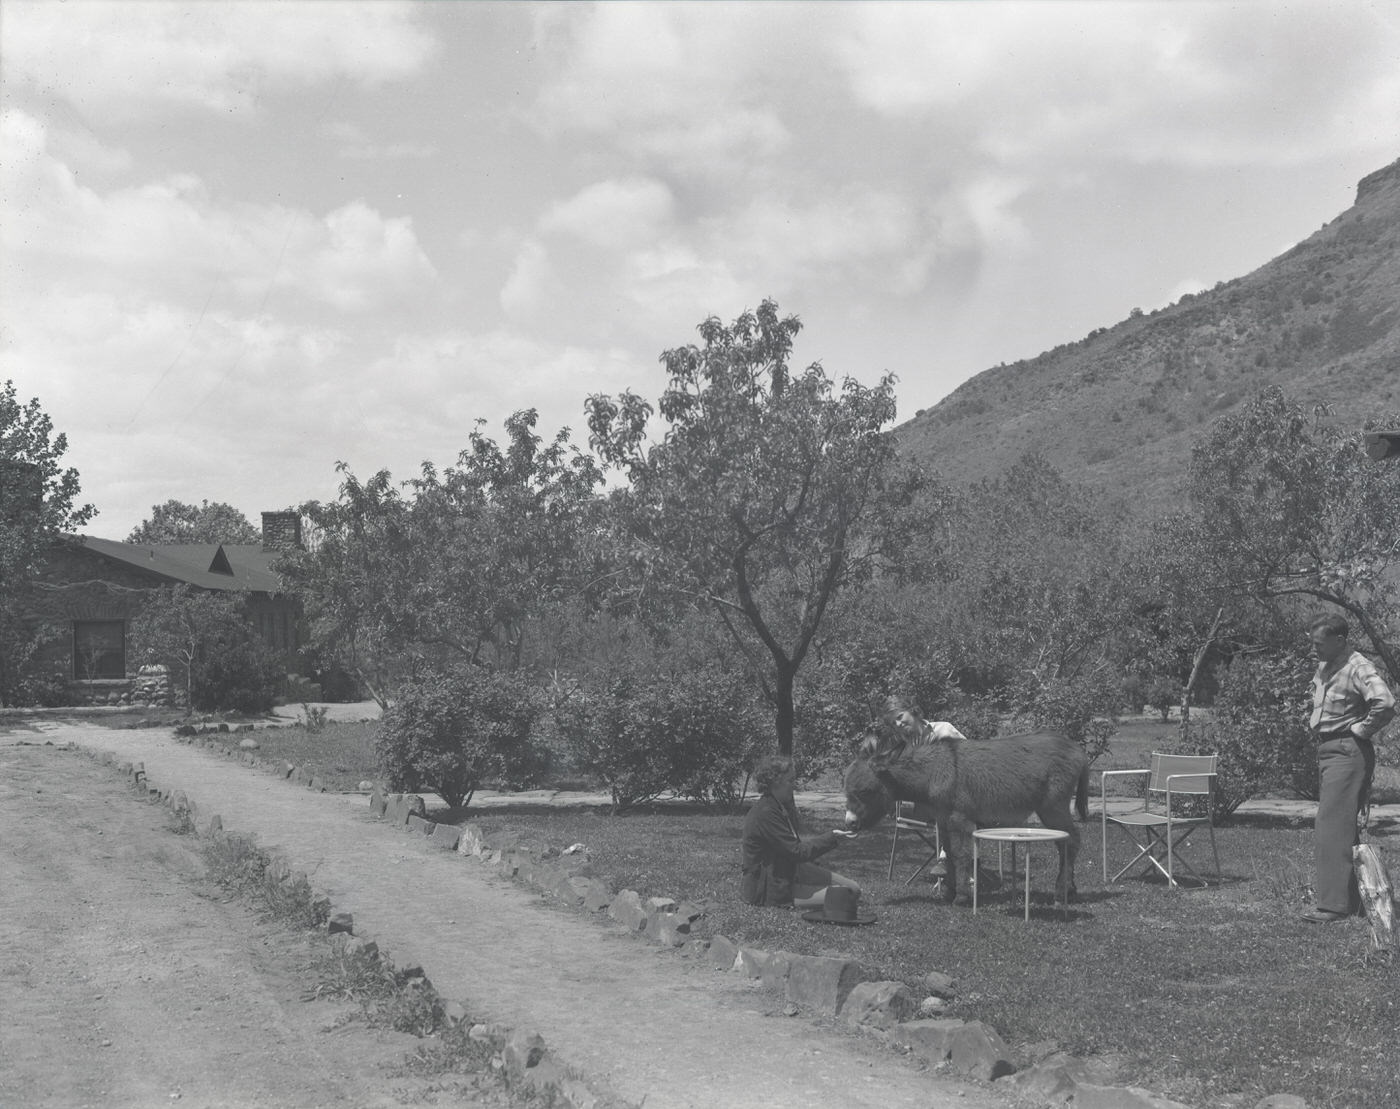 Beaver Creek Ranch Guests on Grounds, 1930s